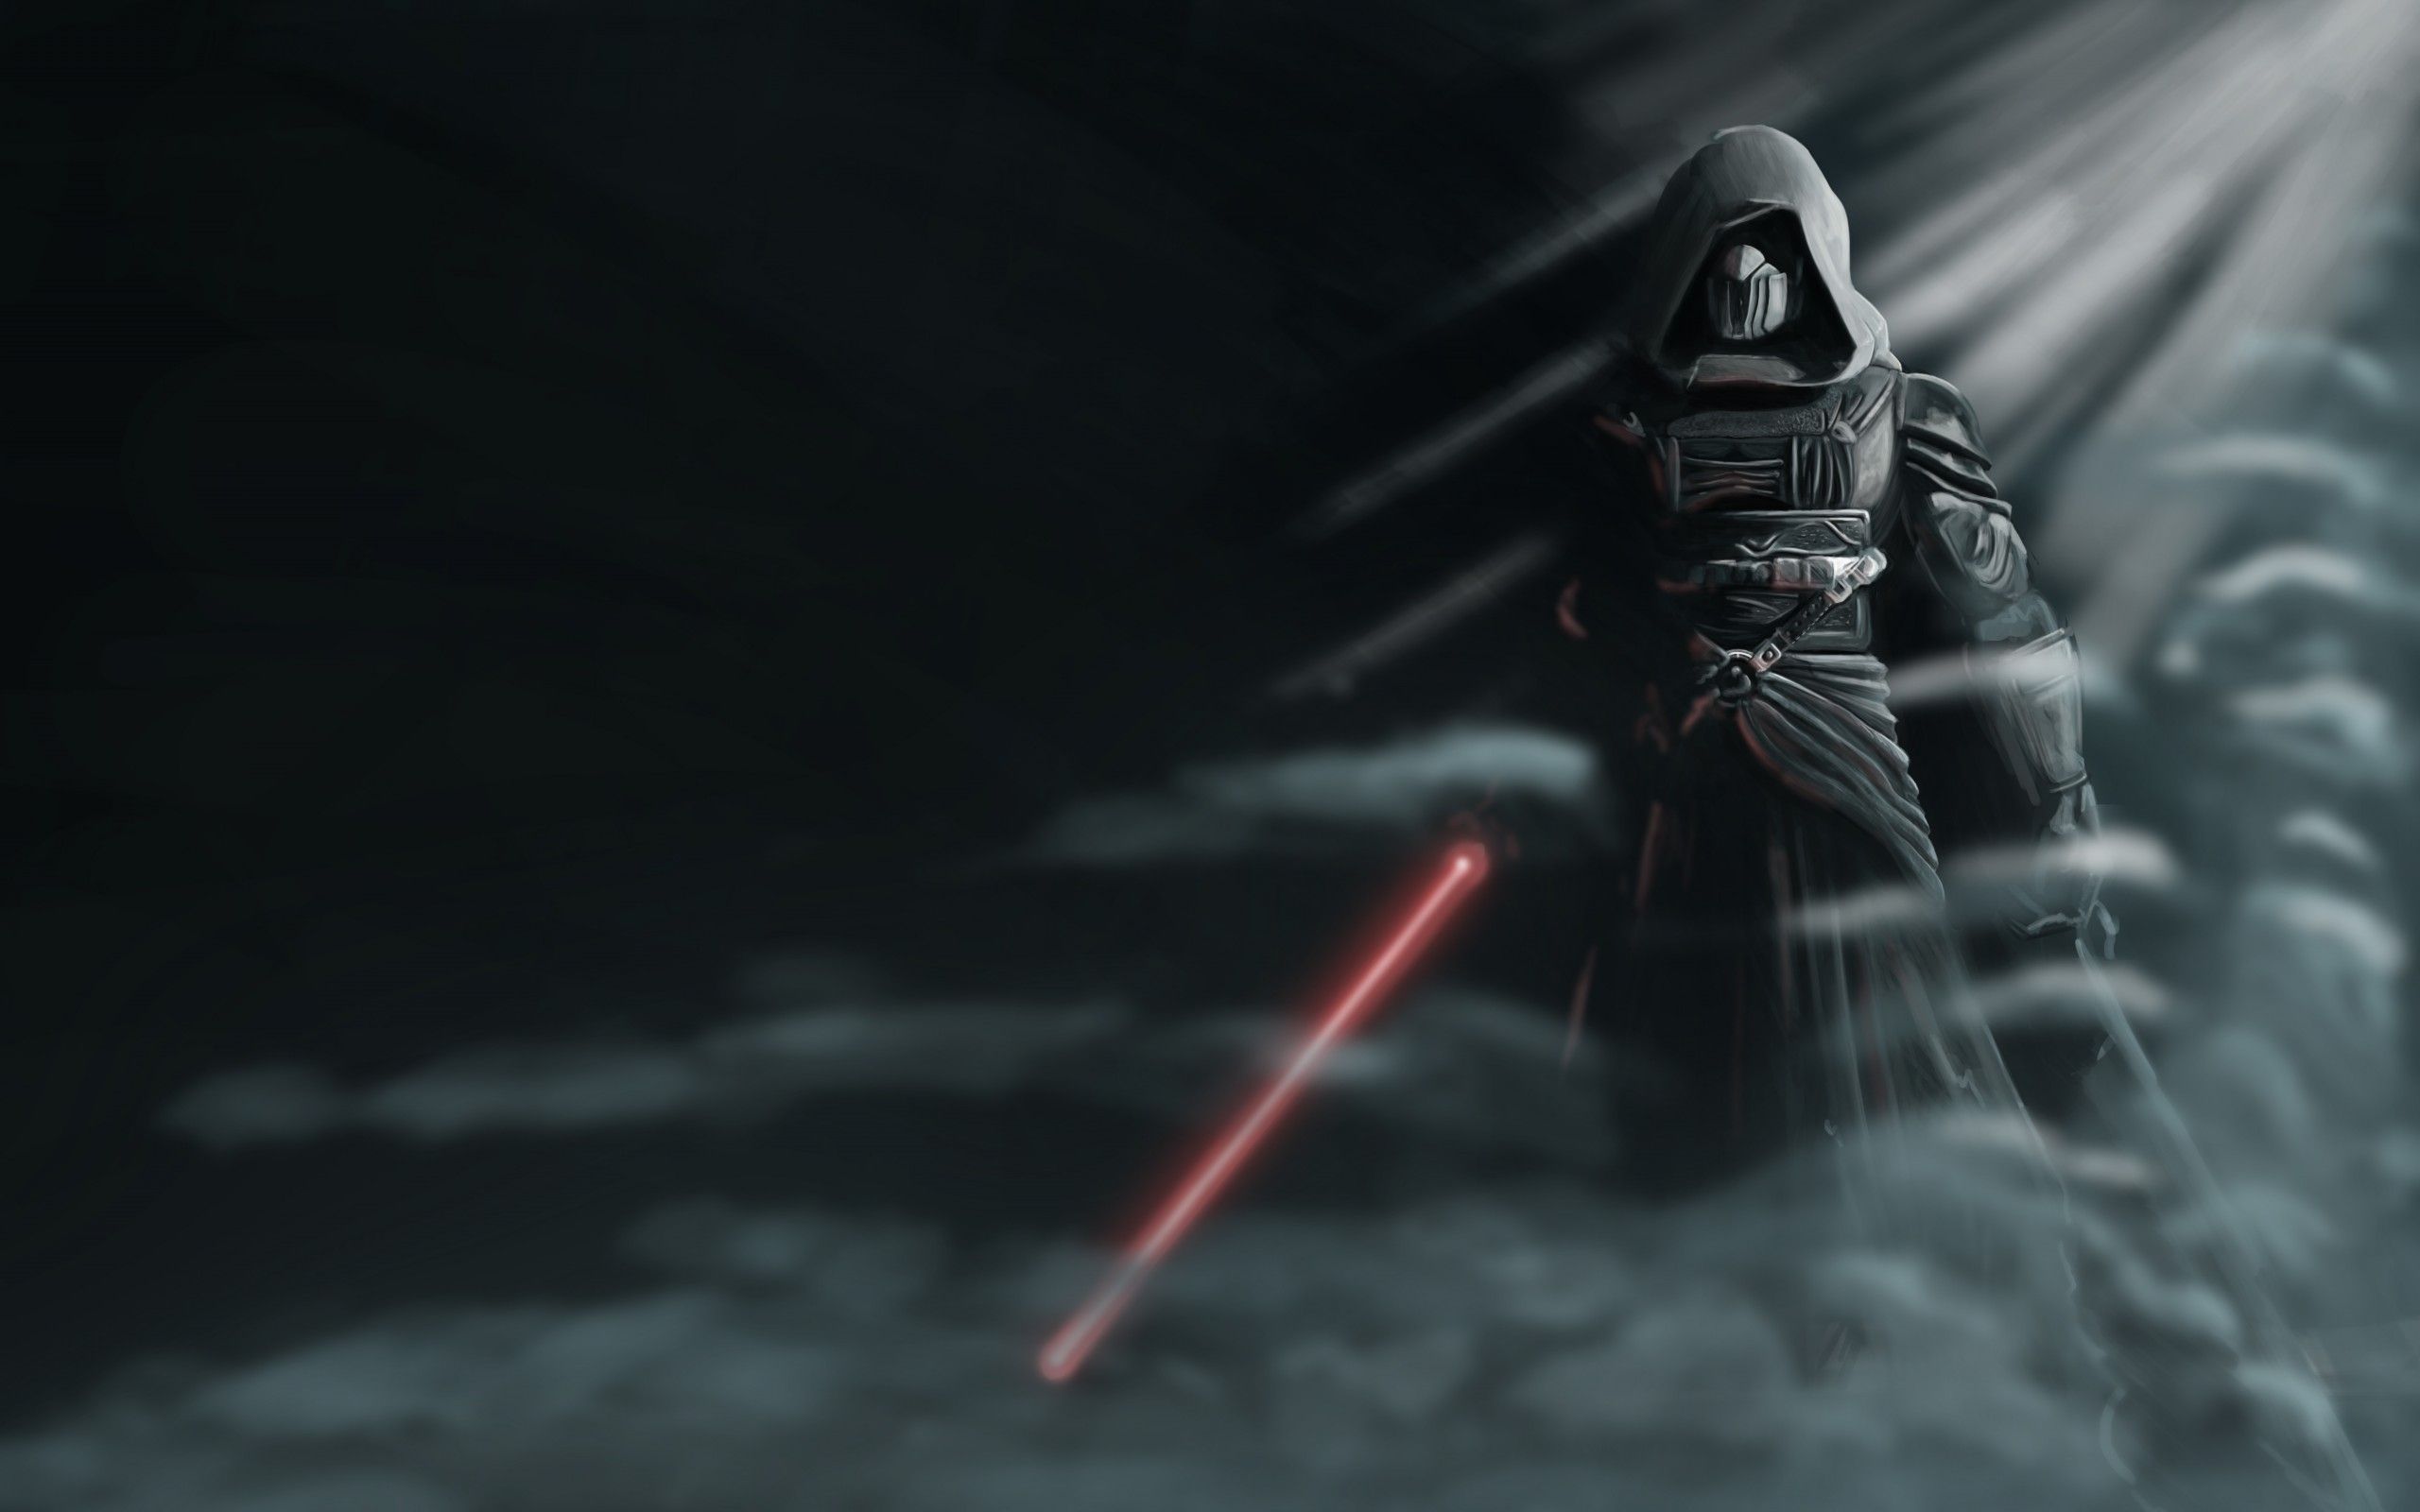 Darth Vader Wallpapers Widescreen # SOD8HPE - 4USkY